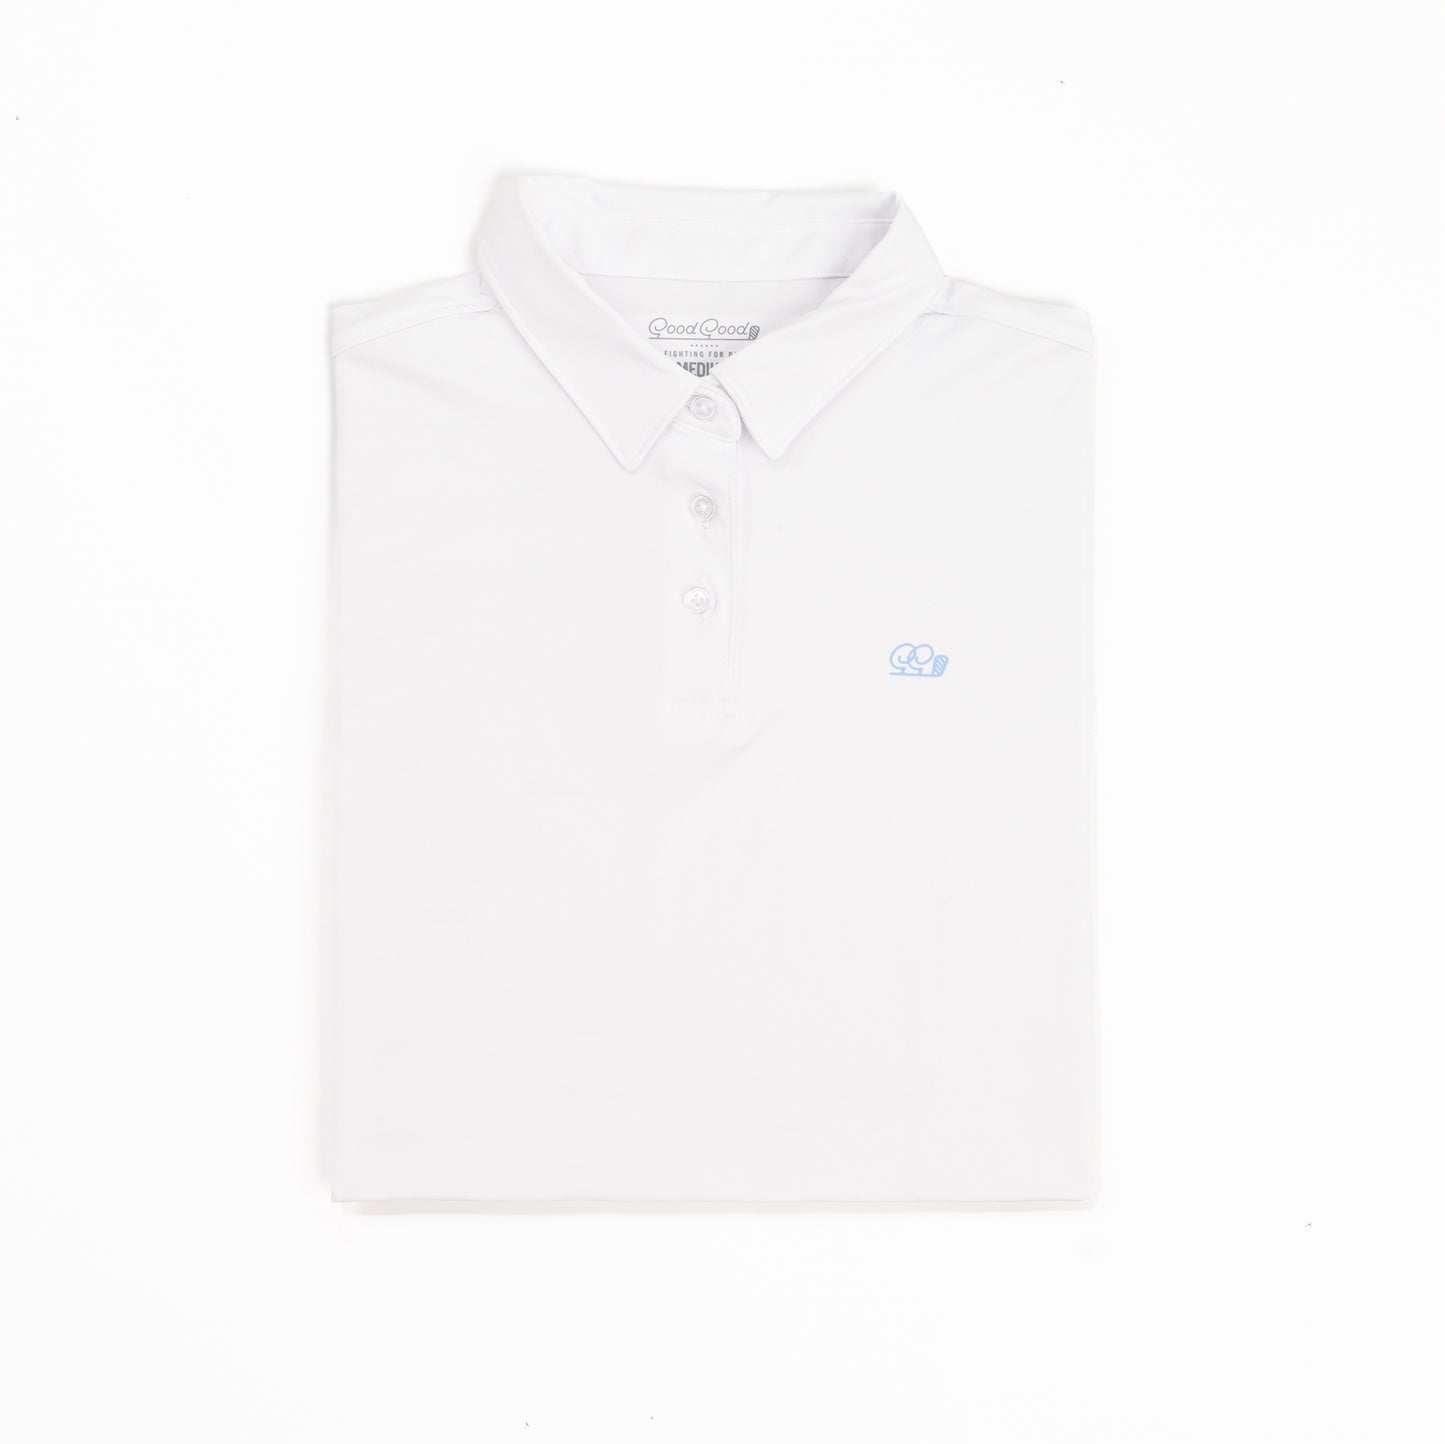 Women's Pure Polo - Exclusive Golf Performance Polo By Good Good